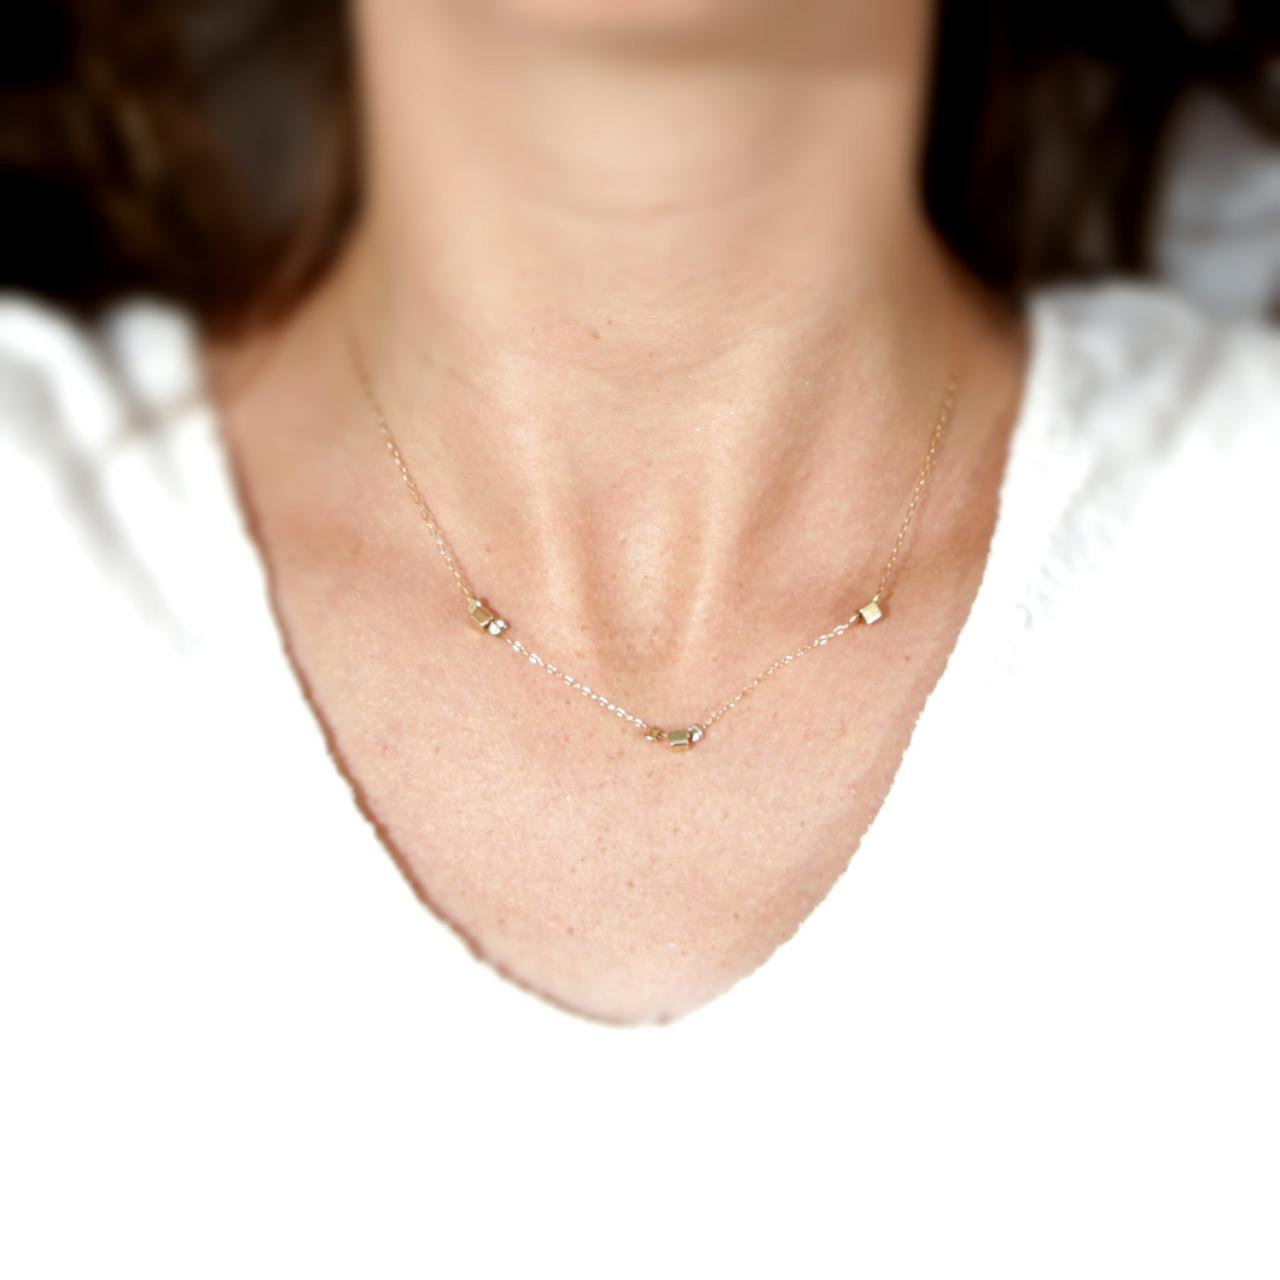 Gold Necklace, Bead Necklace, Gold Filled Necklace, Everyday Necklace, 1bridesmaid Necklace - D15